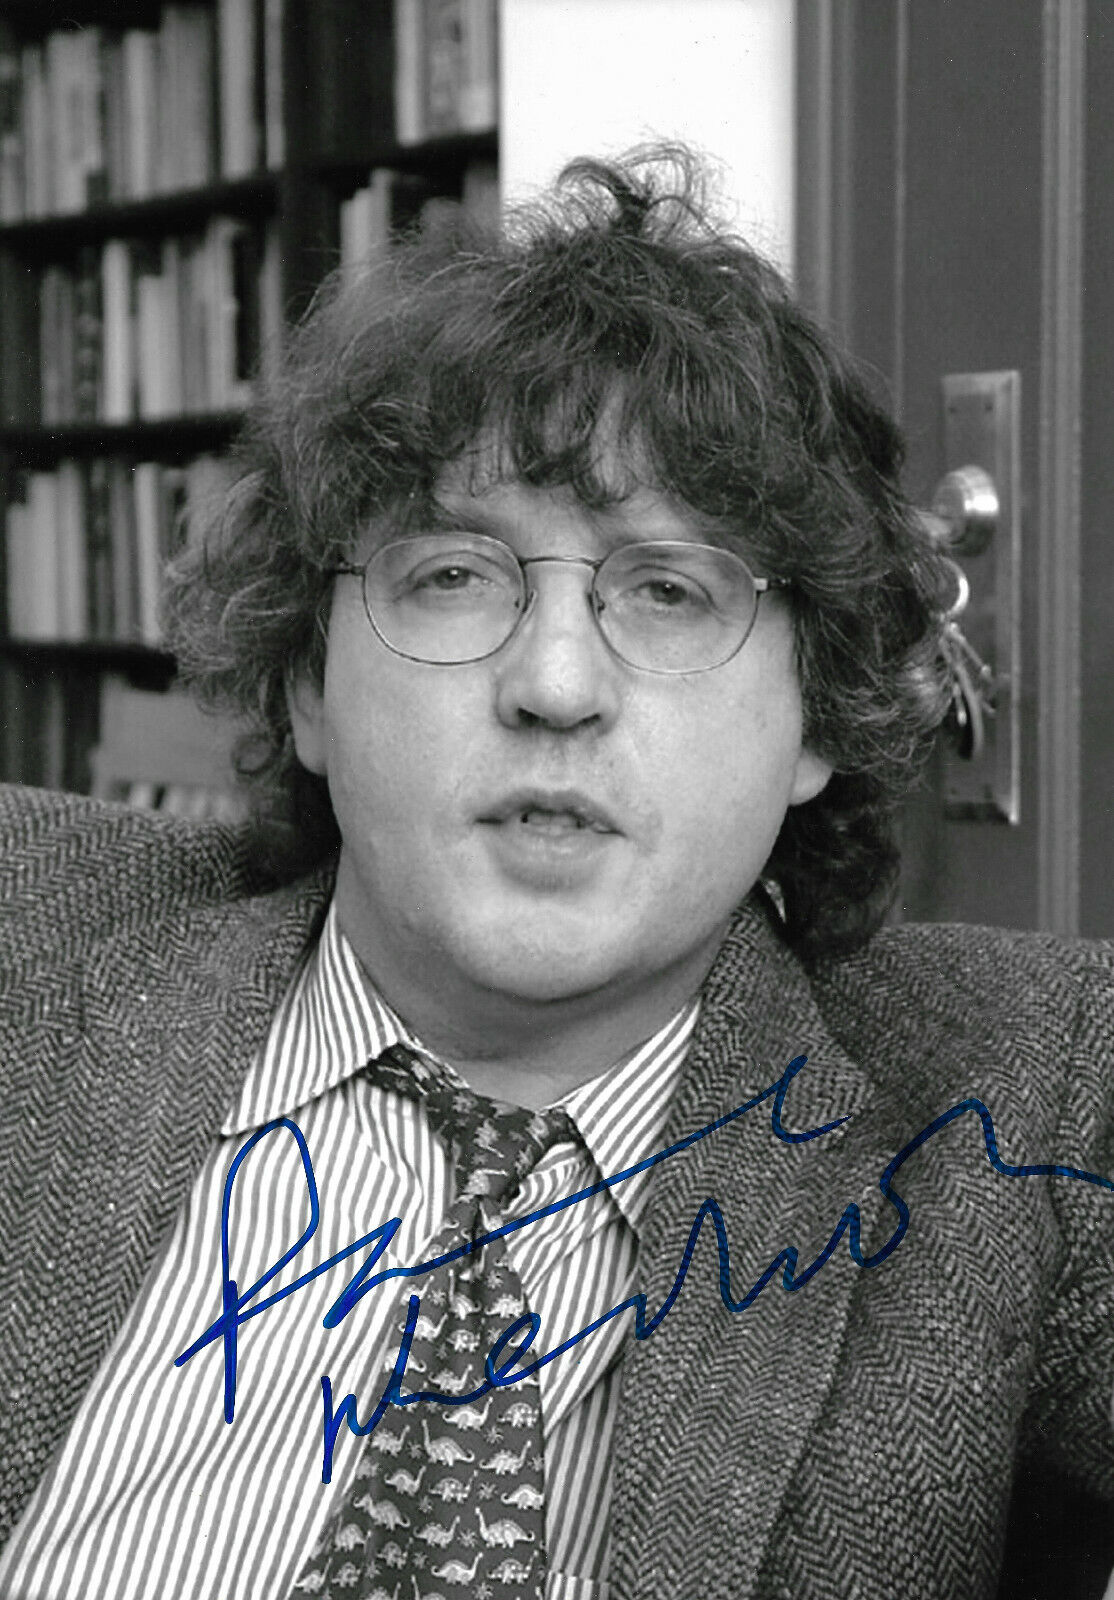 Paul Muldoon Writer Poet signed 8x12 inch Photo Poster painting autograph